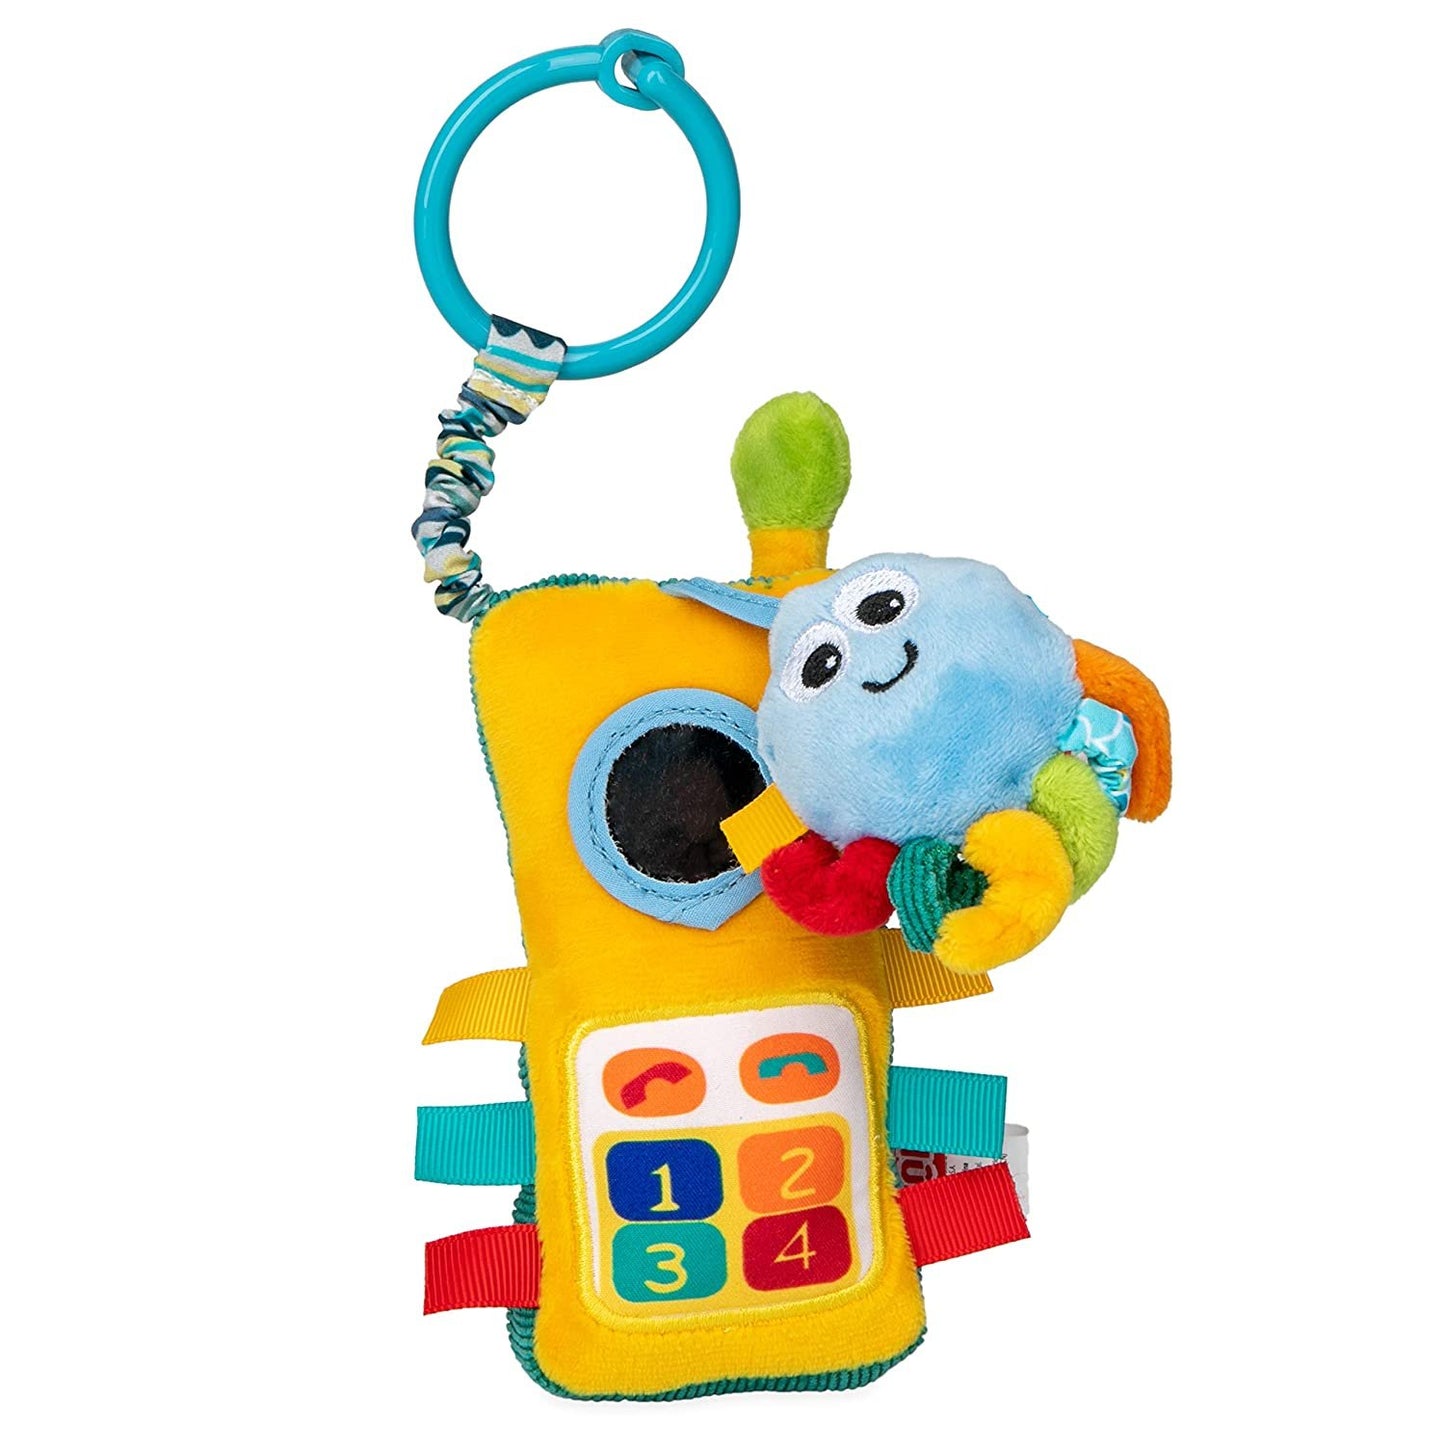 Nuby Plush Phone Pals Musical Hanging Toy with Connector Ring: 0M+, Multi